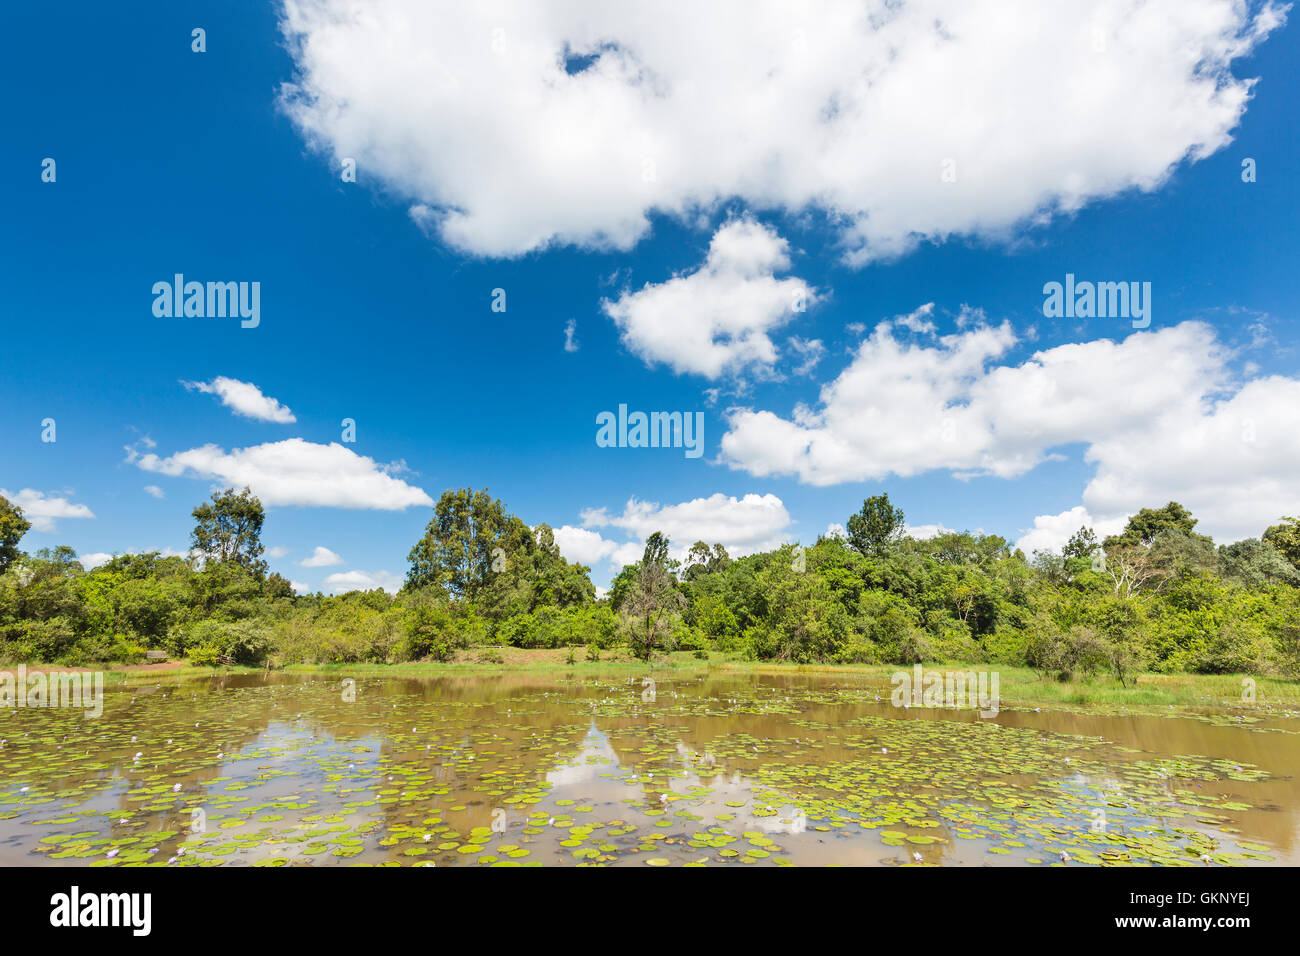 The beautiful Lily Lake in Karura Forest with deep blue sky in Nairobi, Kenya. Stock Photo